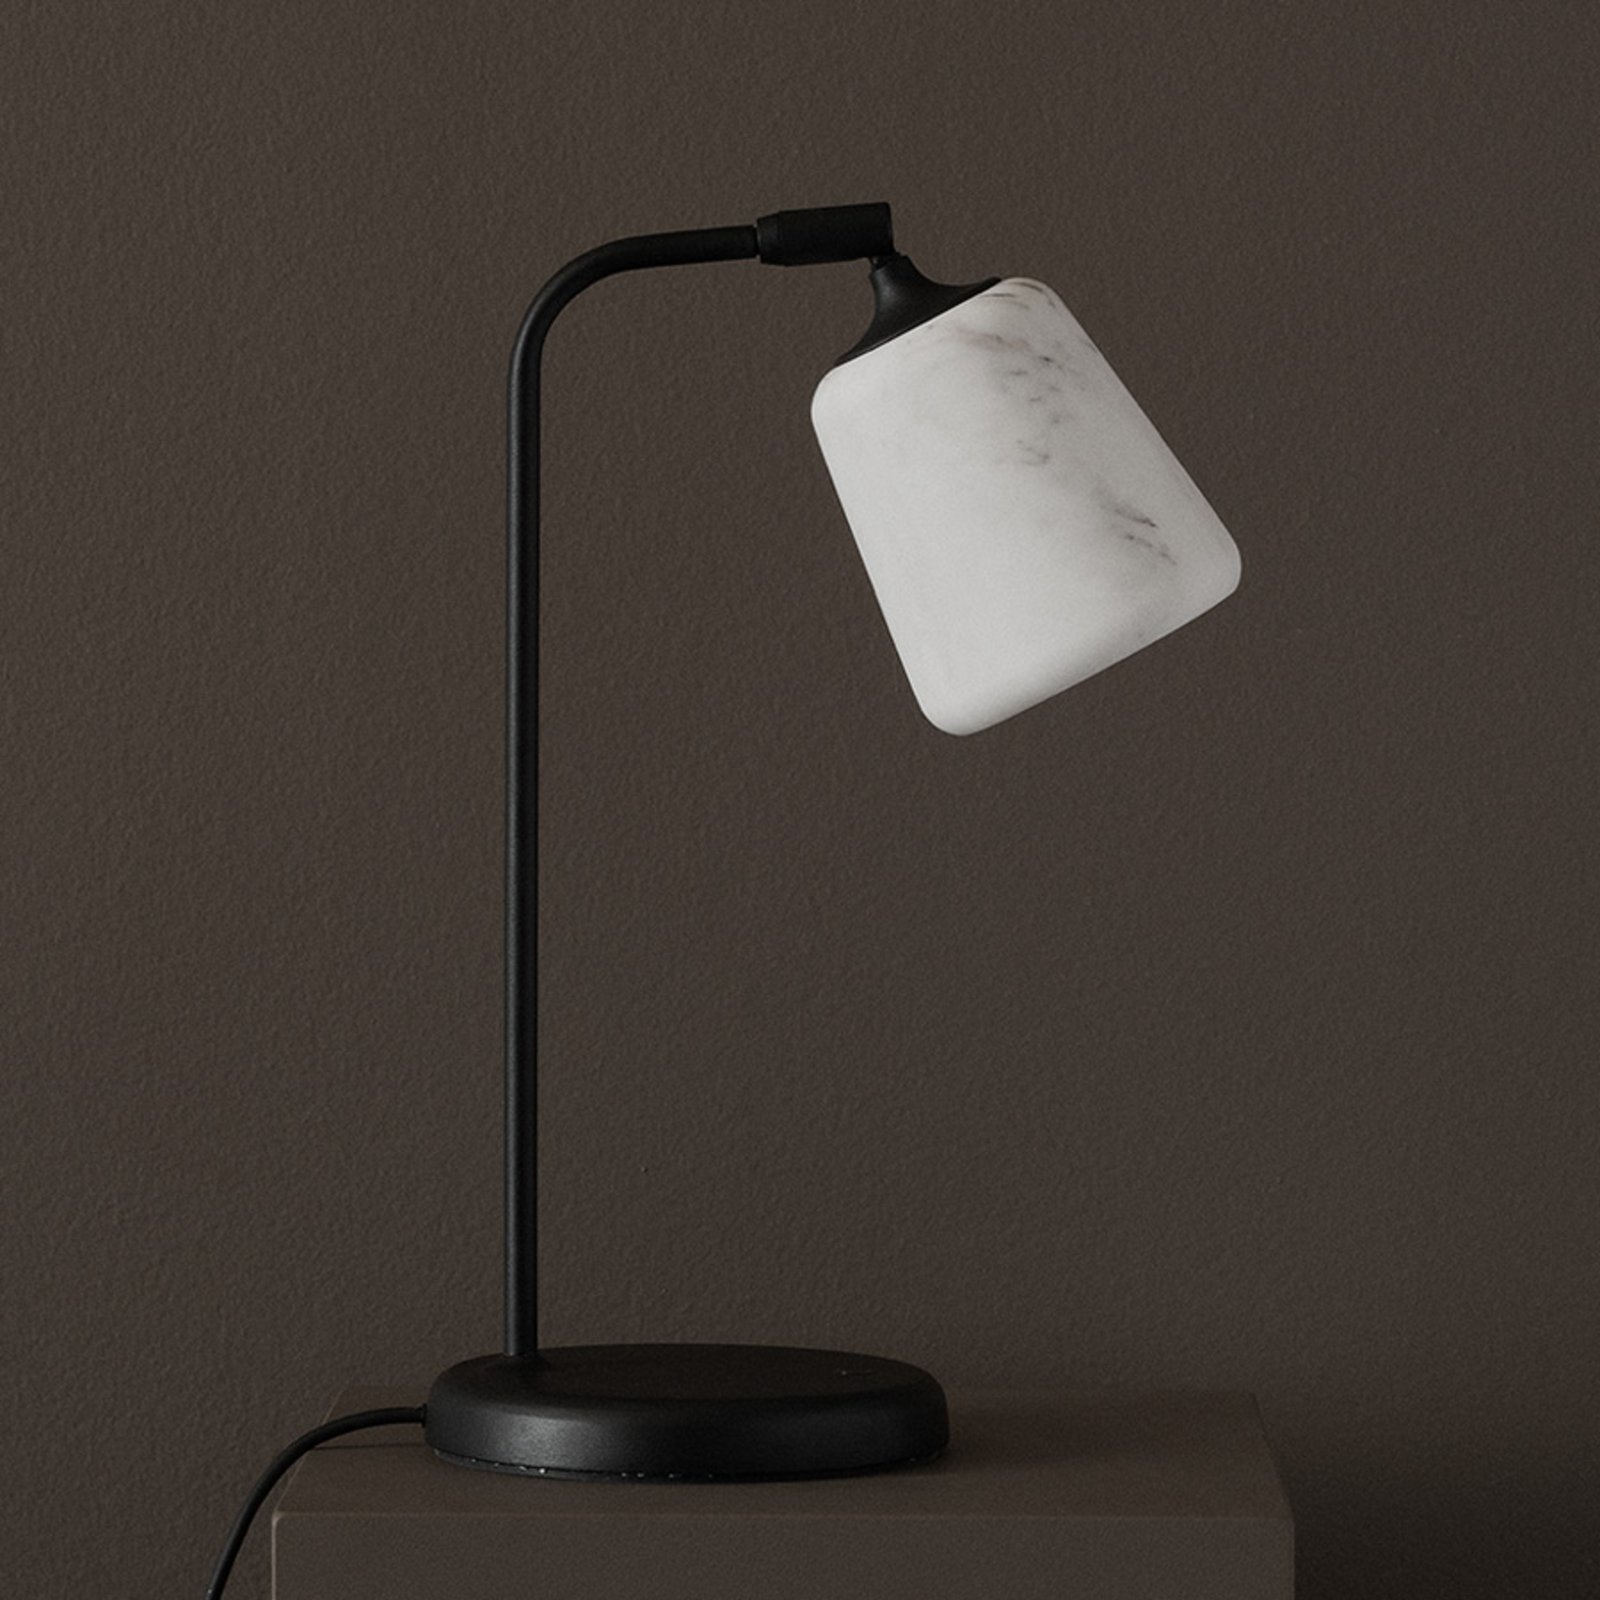 New Works Material New Edition bordslampa, marmor